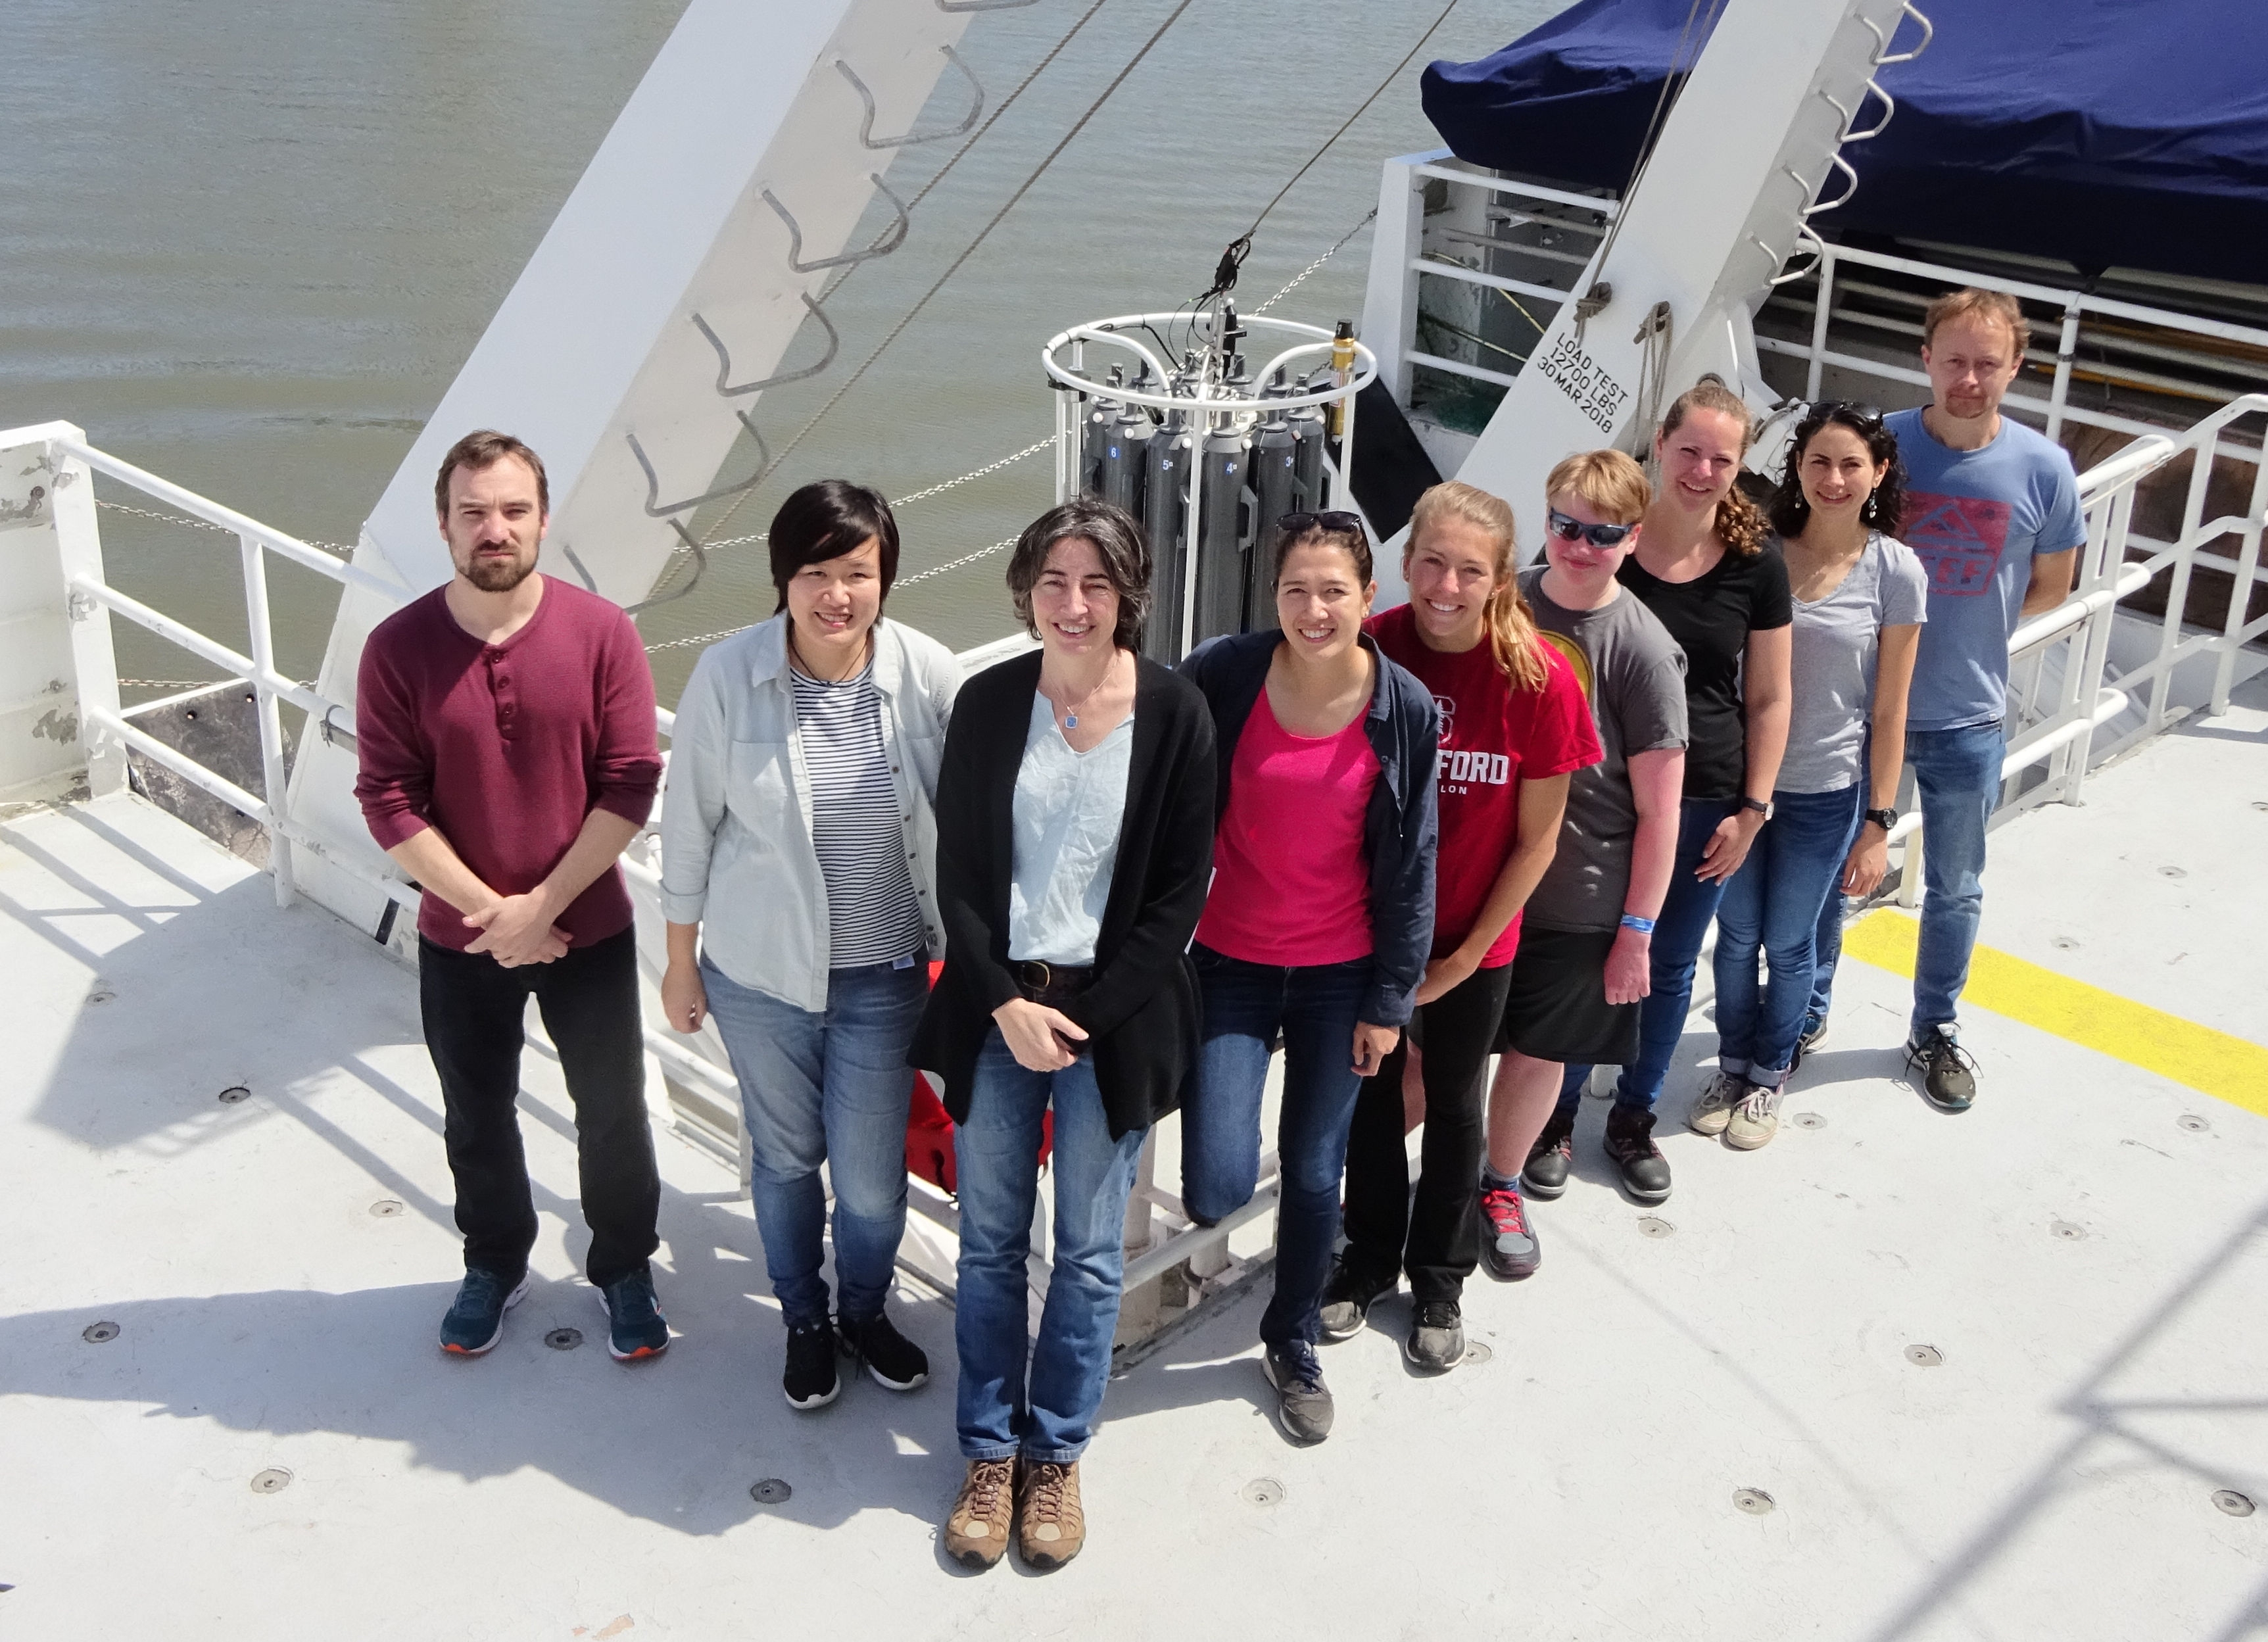 MBL Senior Scientist Alex Worden, front, with her team members from several institutes preparing for a research cruise. Credit: Alex Worden